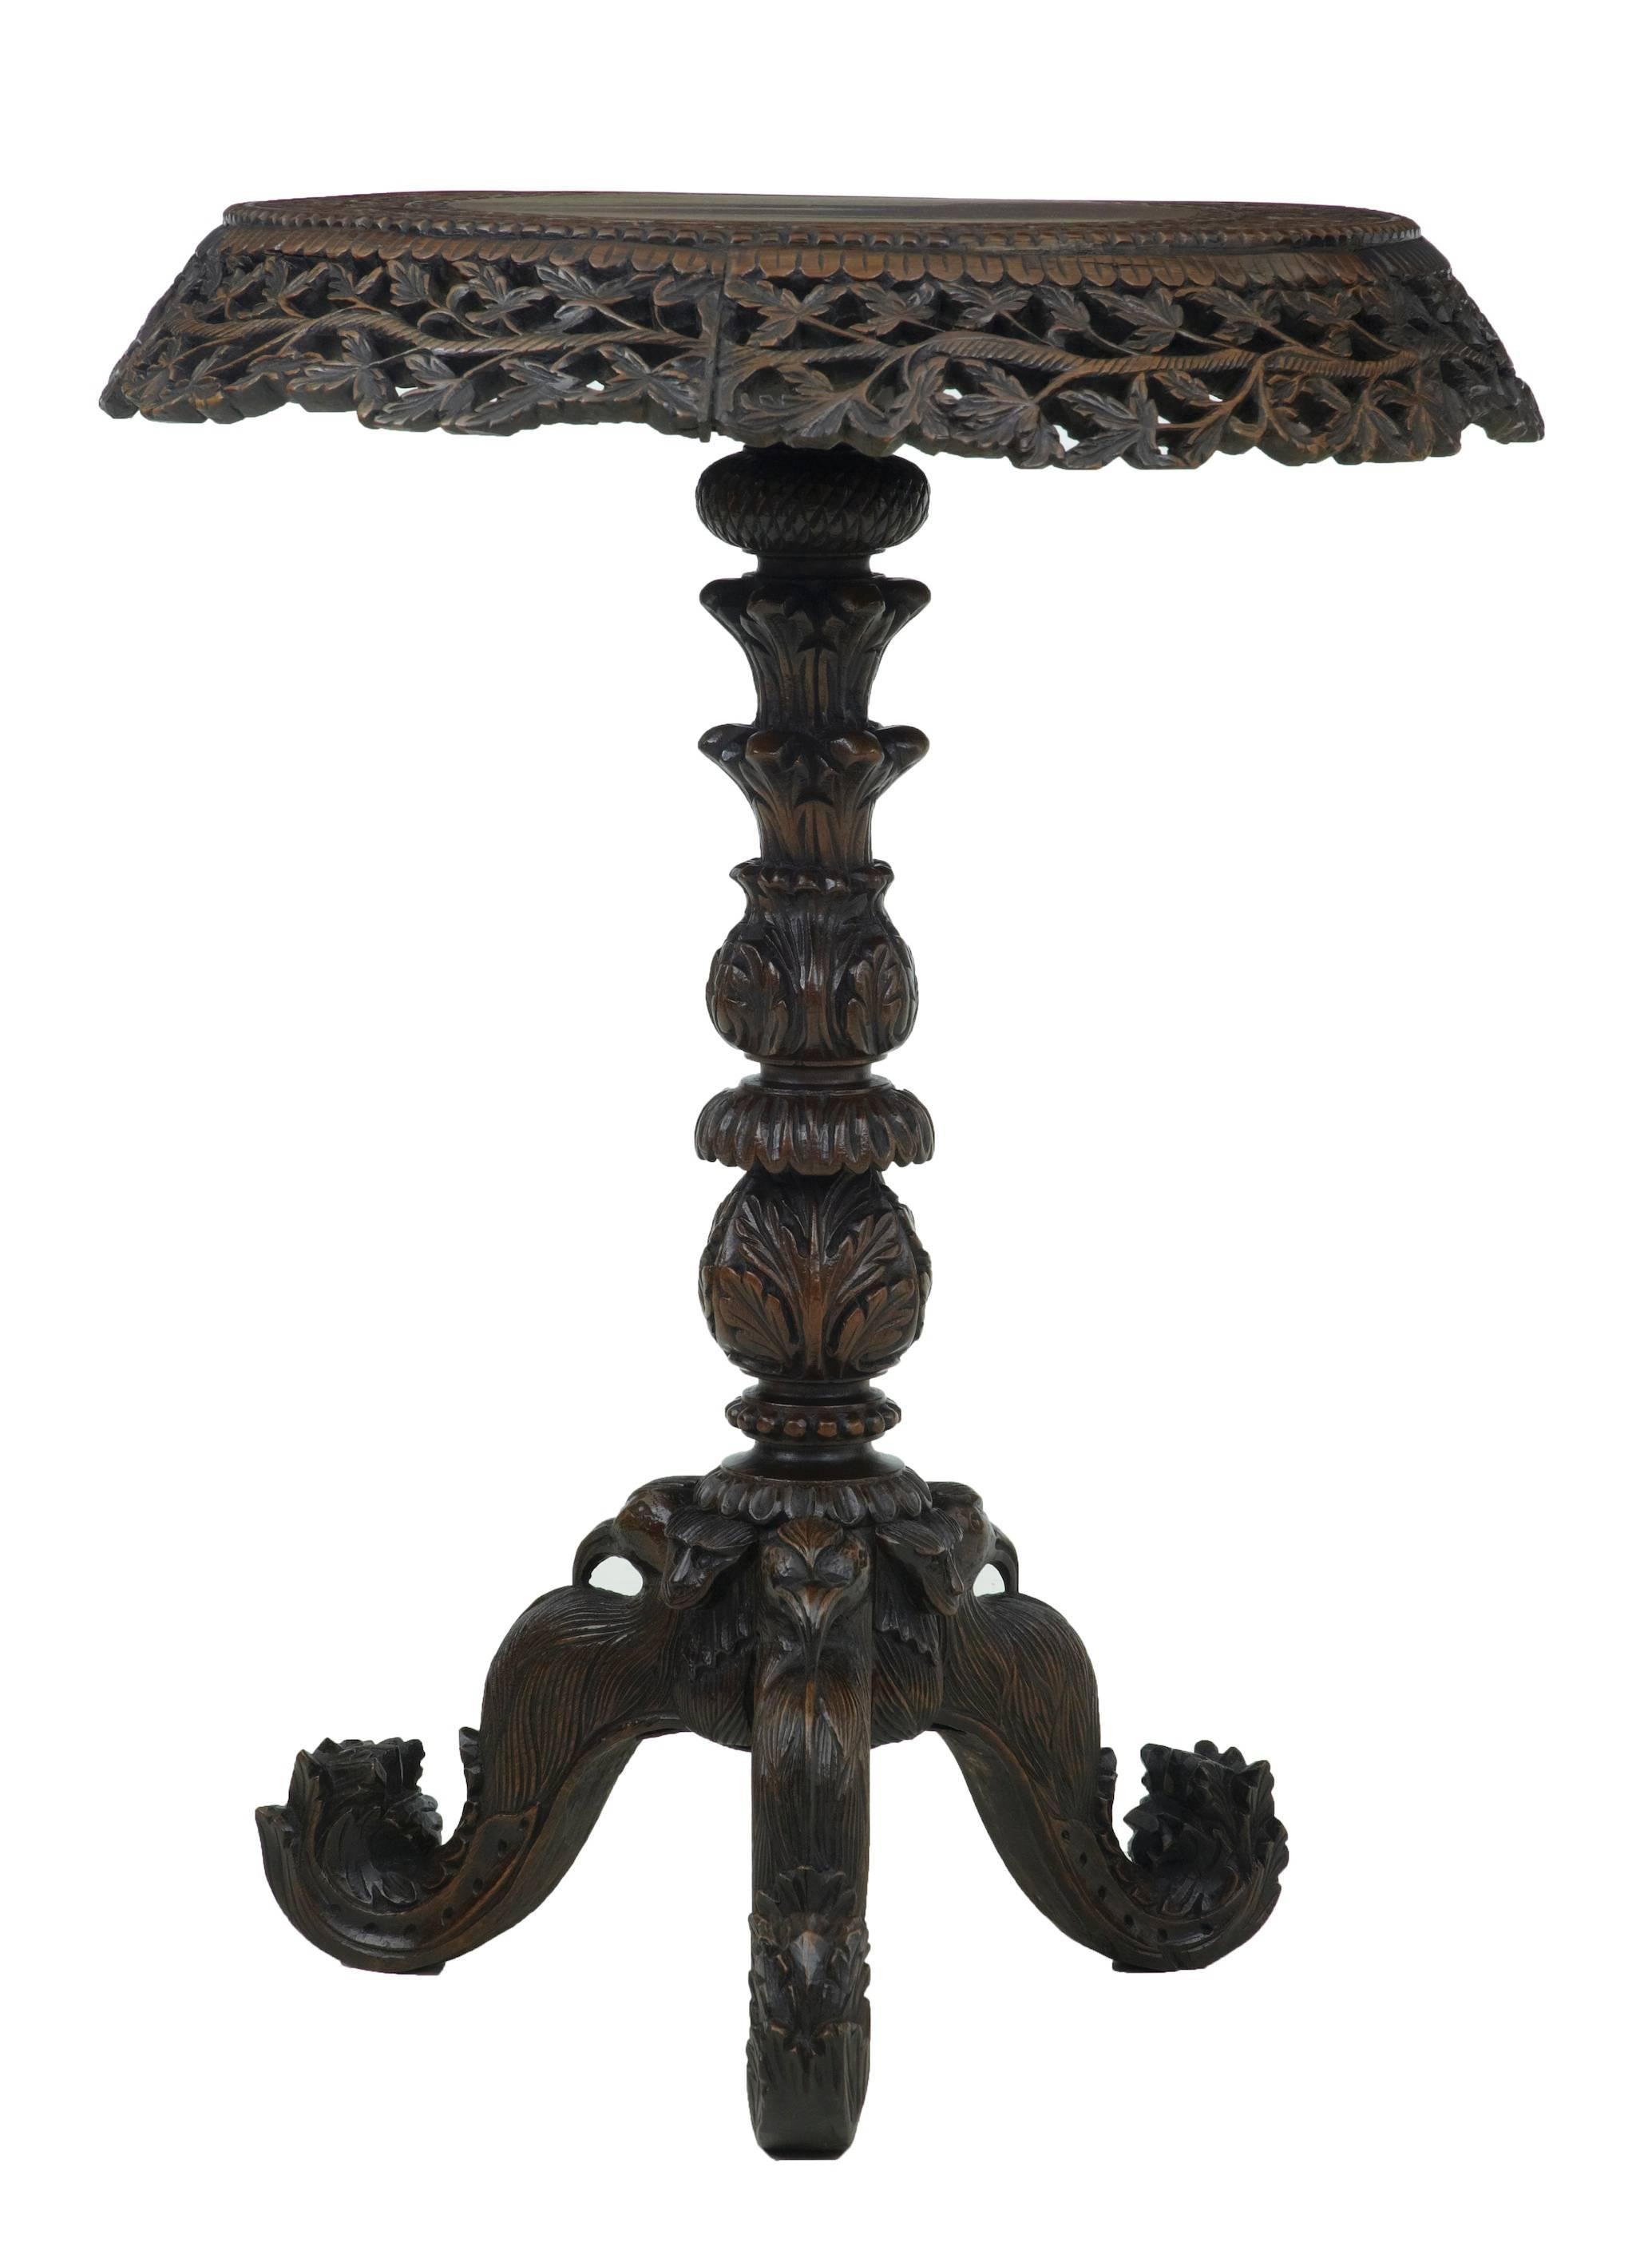 19th Century Carved Hardwood Ceylonese Flip-Top Tripod Table (Anglo-indisch)